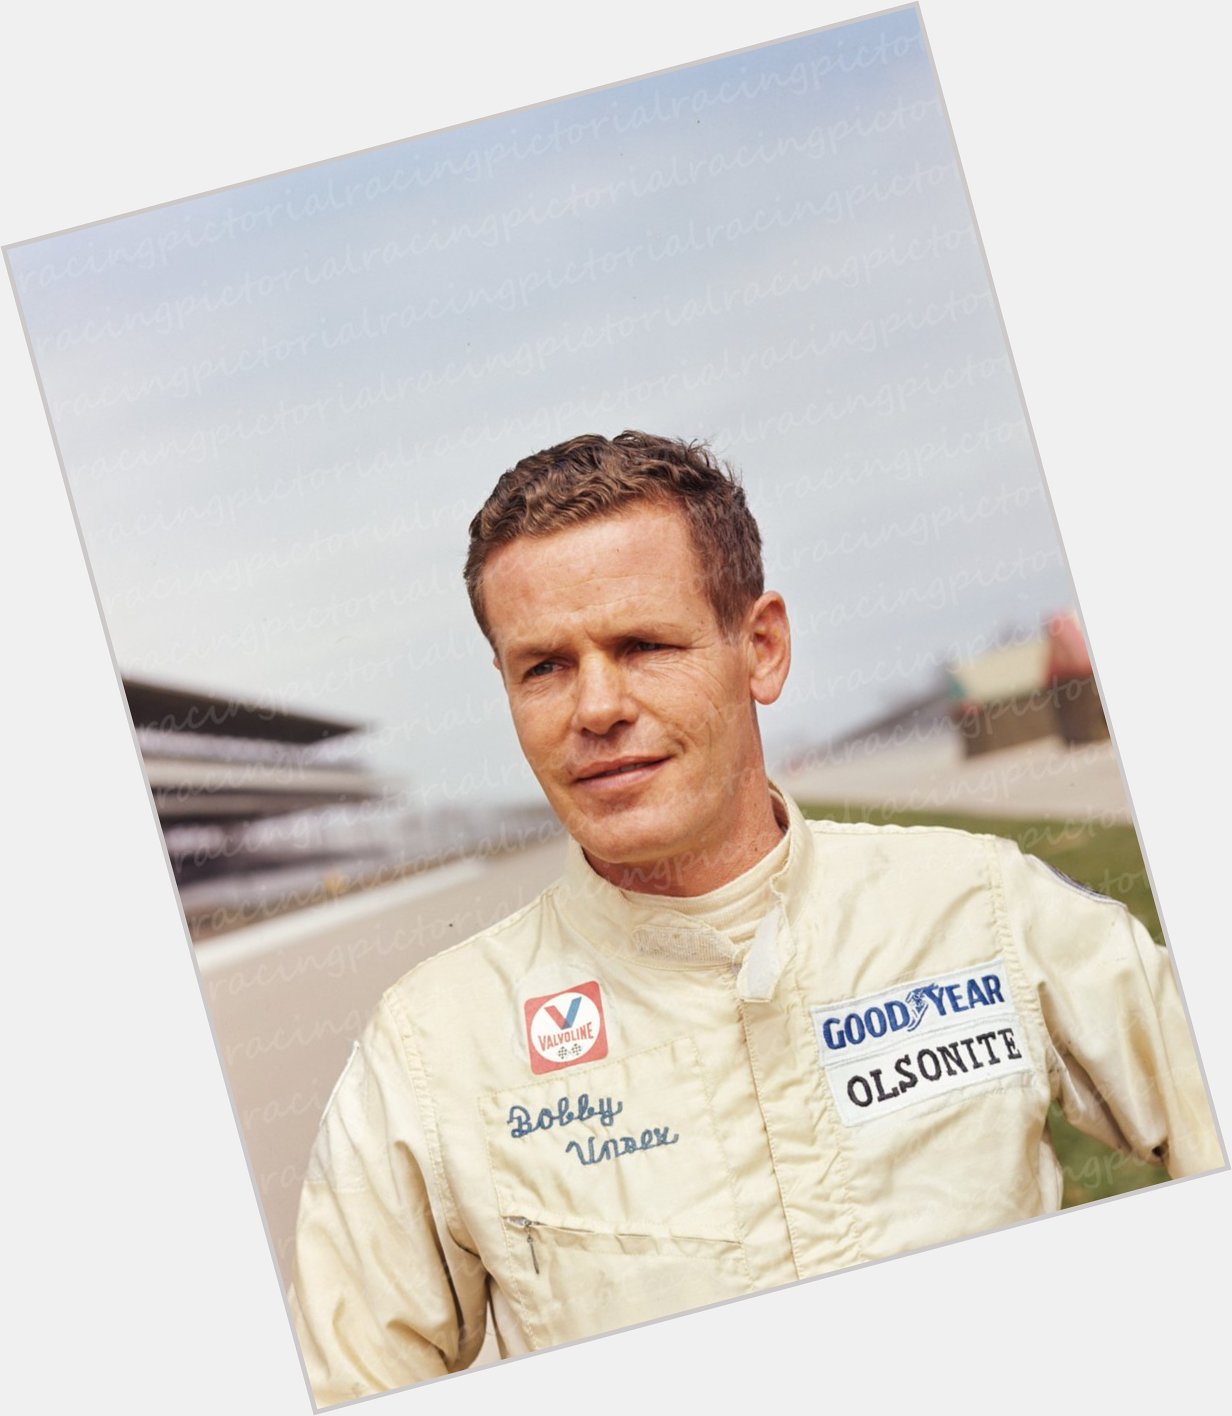 Happy Birthday to a legend who is very much missed, Mr. Bobby Unser. 